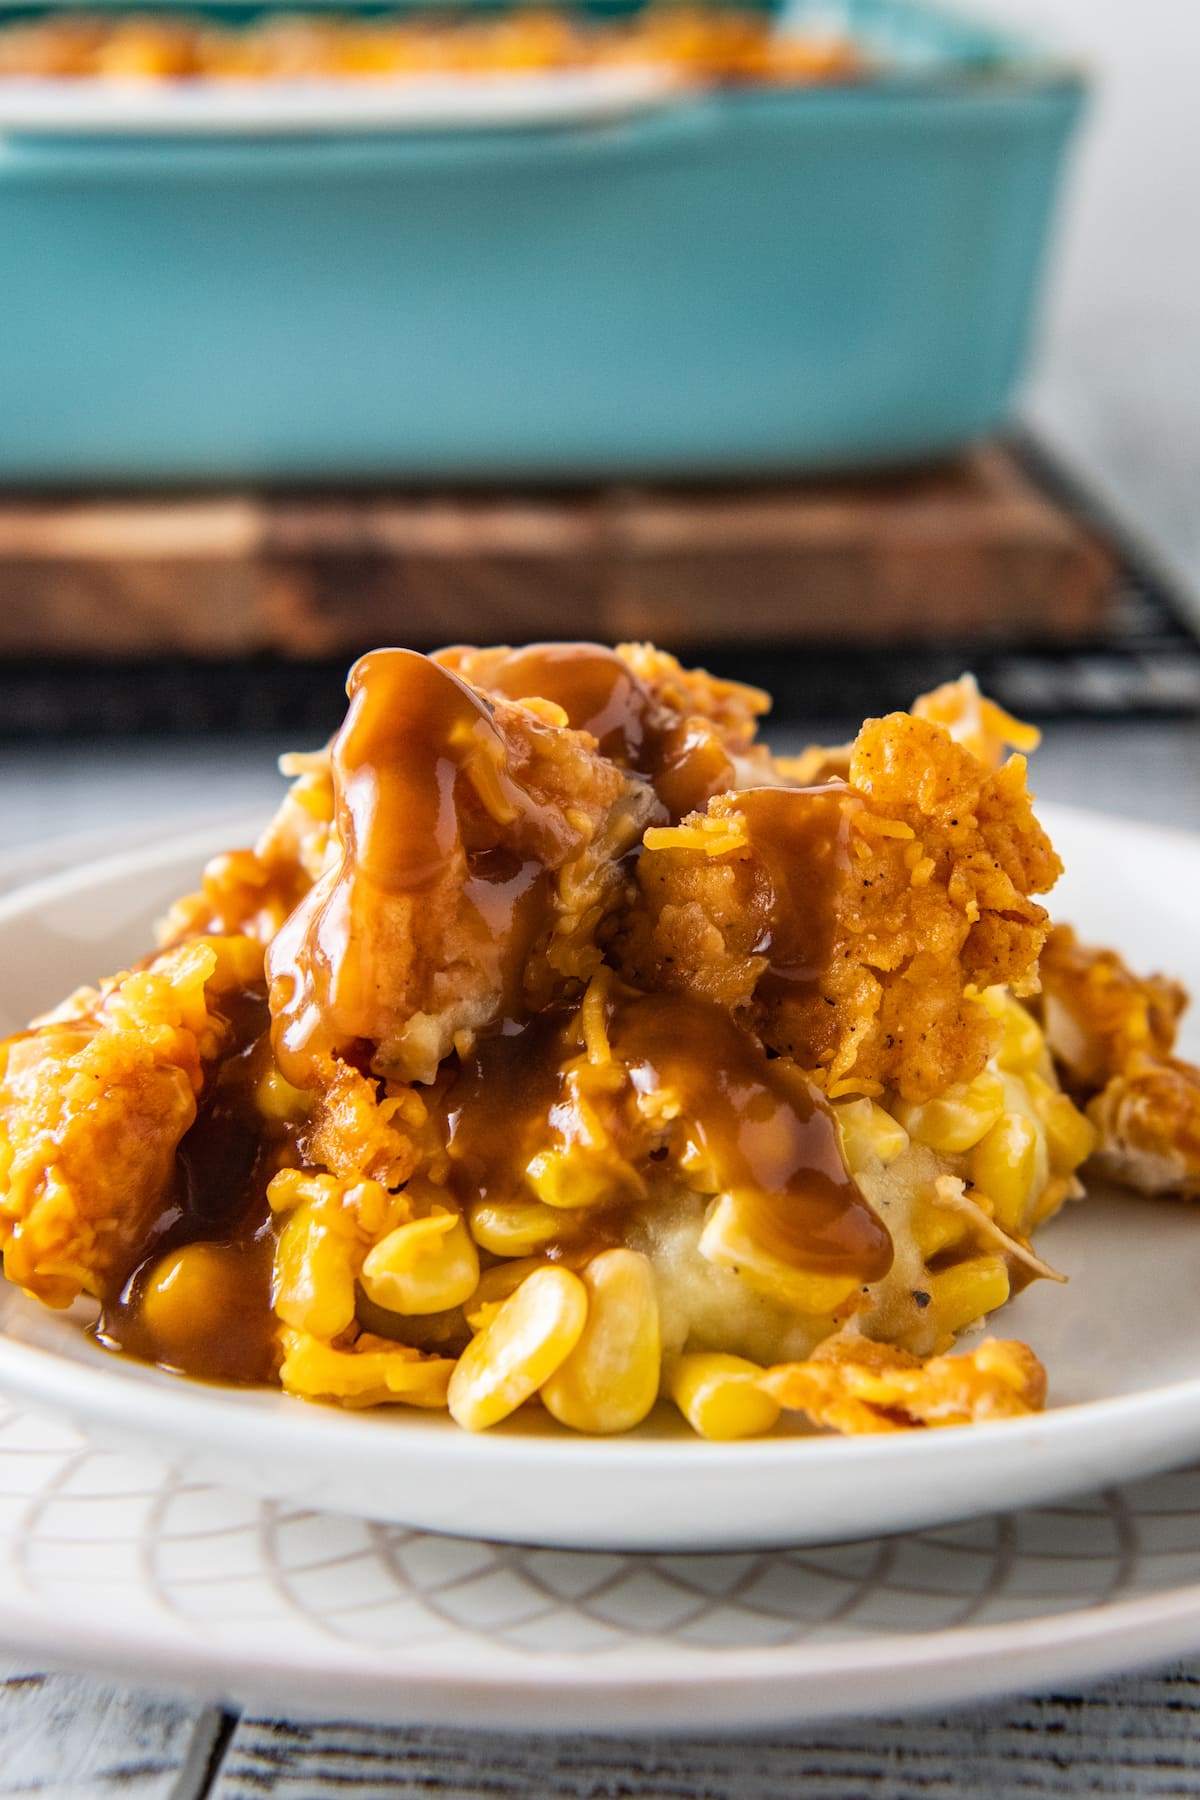 a plate with crispy chicken casserole made with mashed potatoes, corn, cheese, and gravy